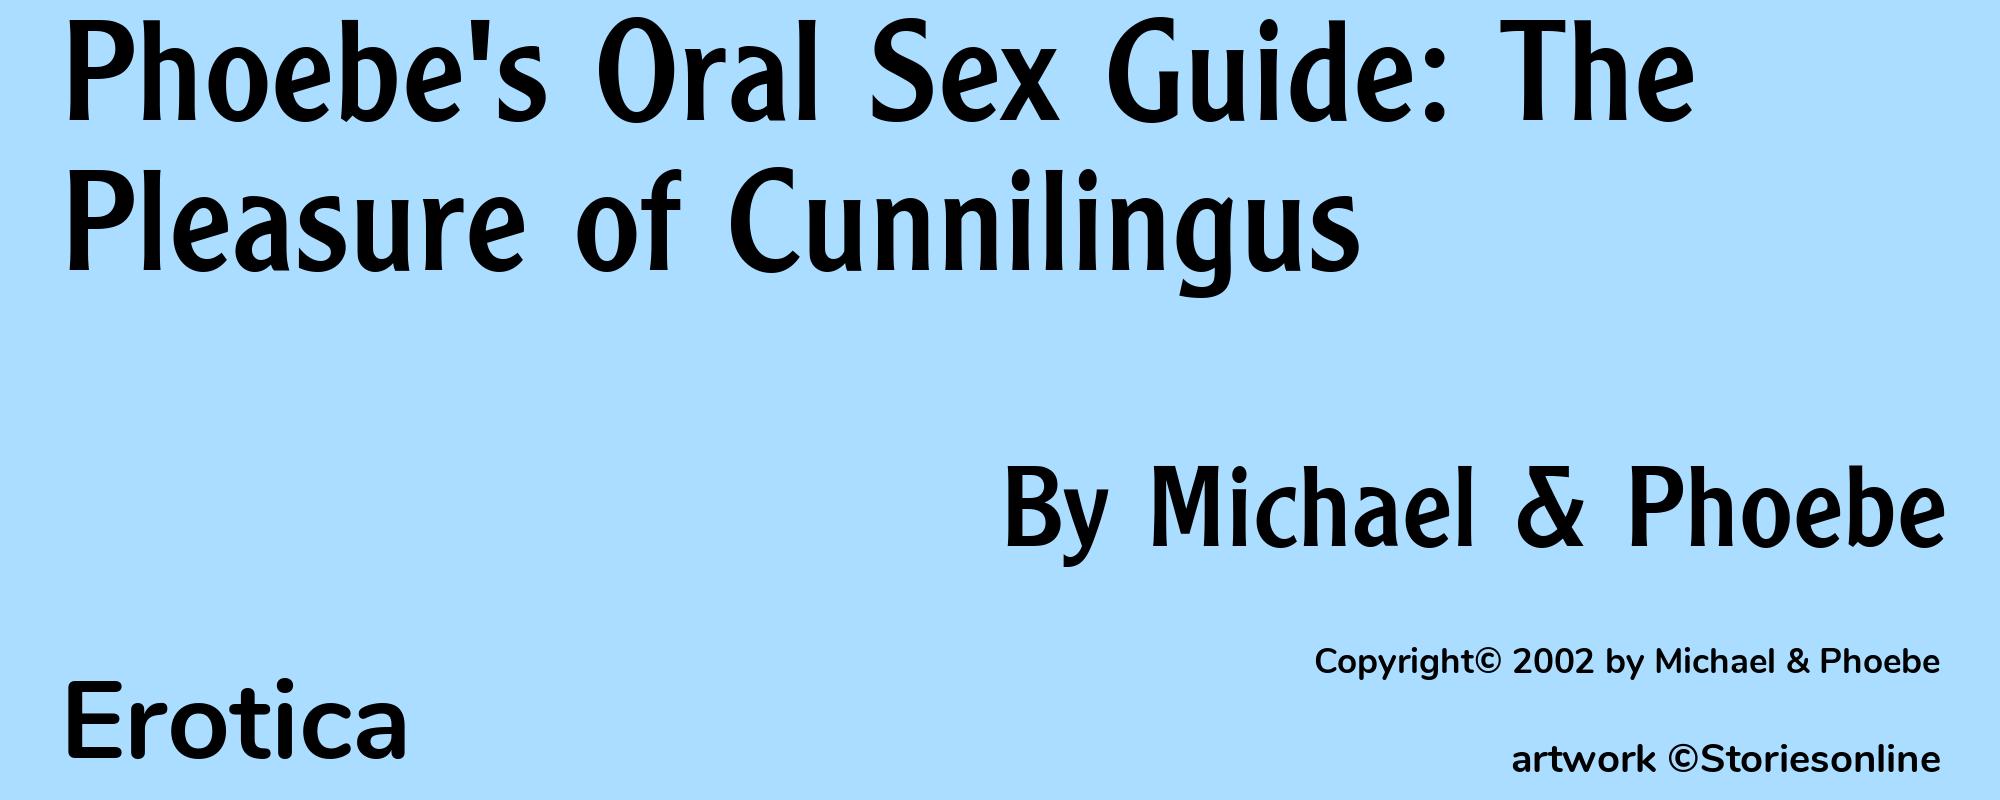 Phoebe's Oral Sex Guide: The Pleasure of Cunnilingus - Cover